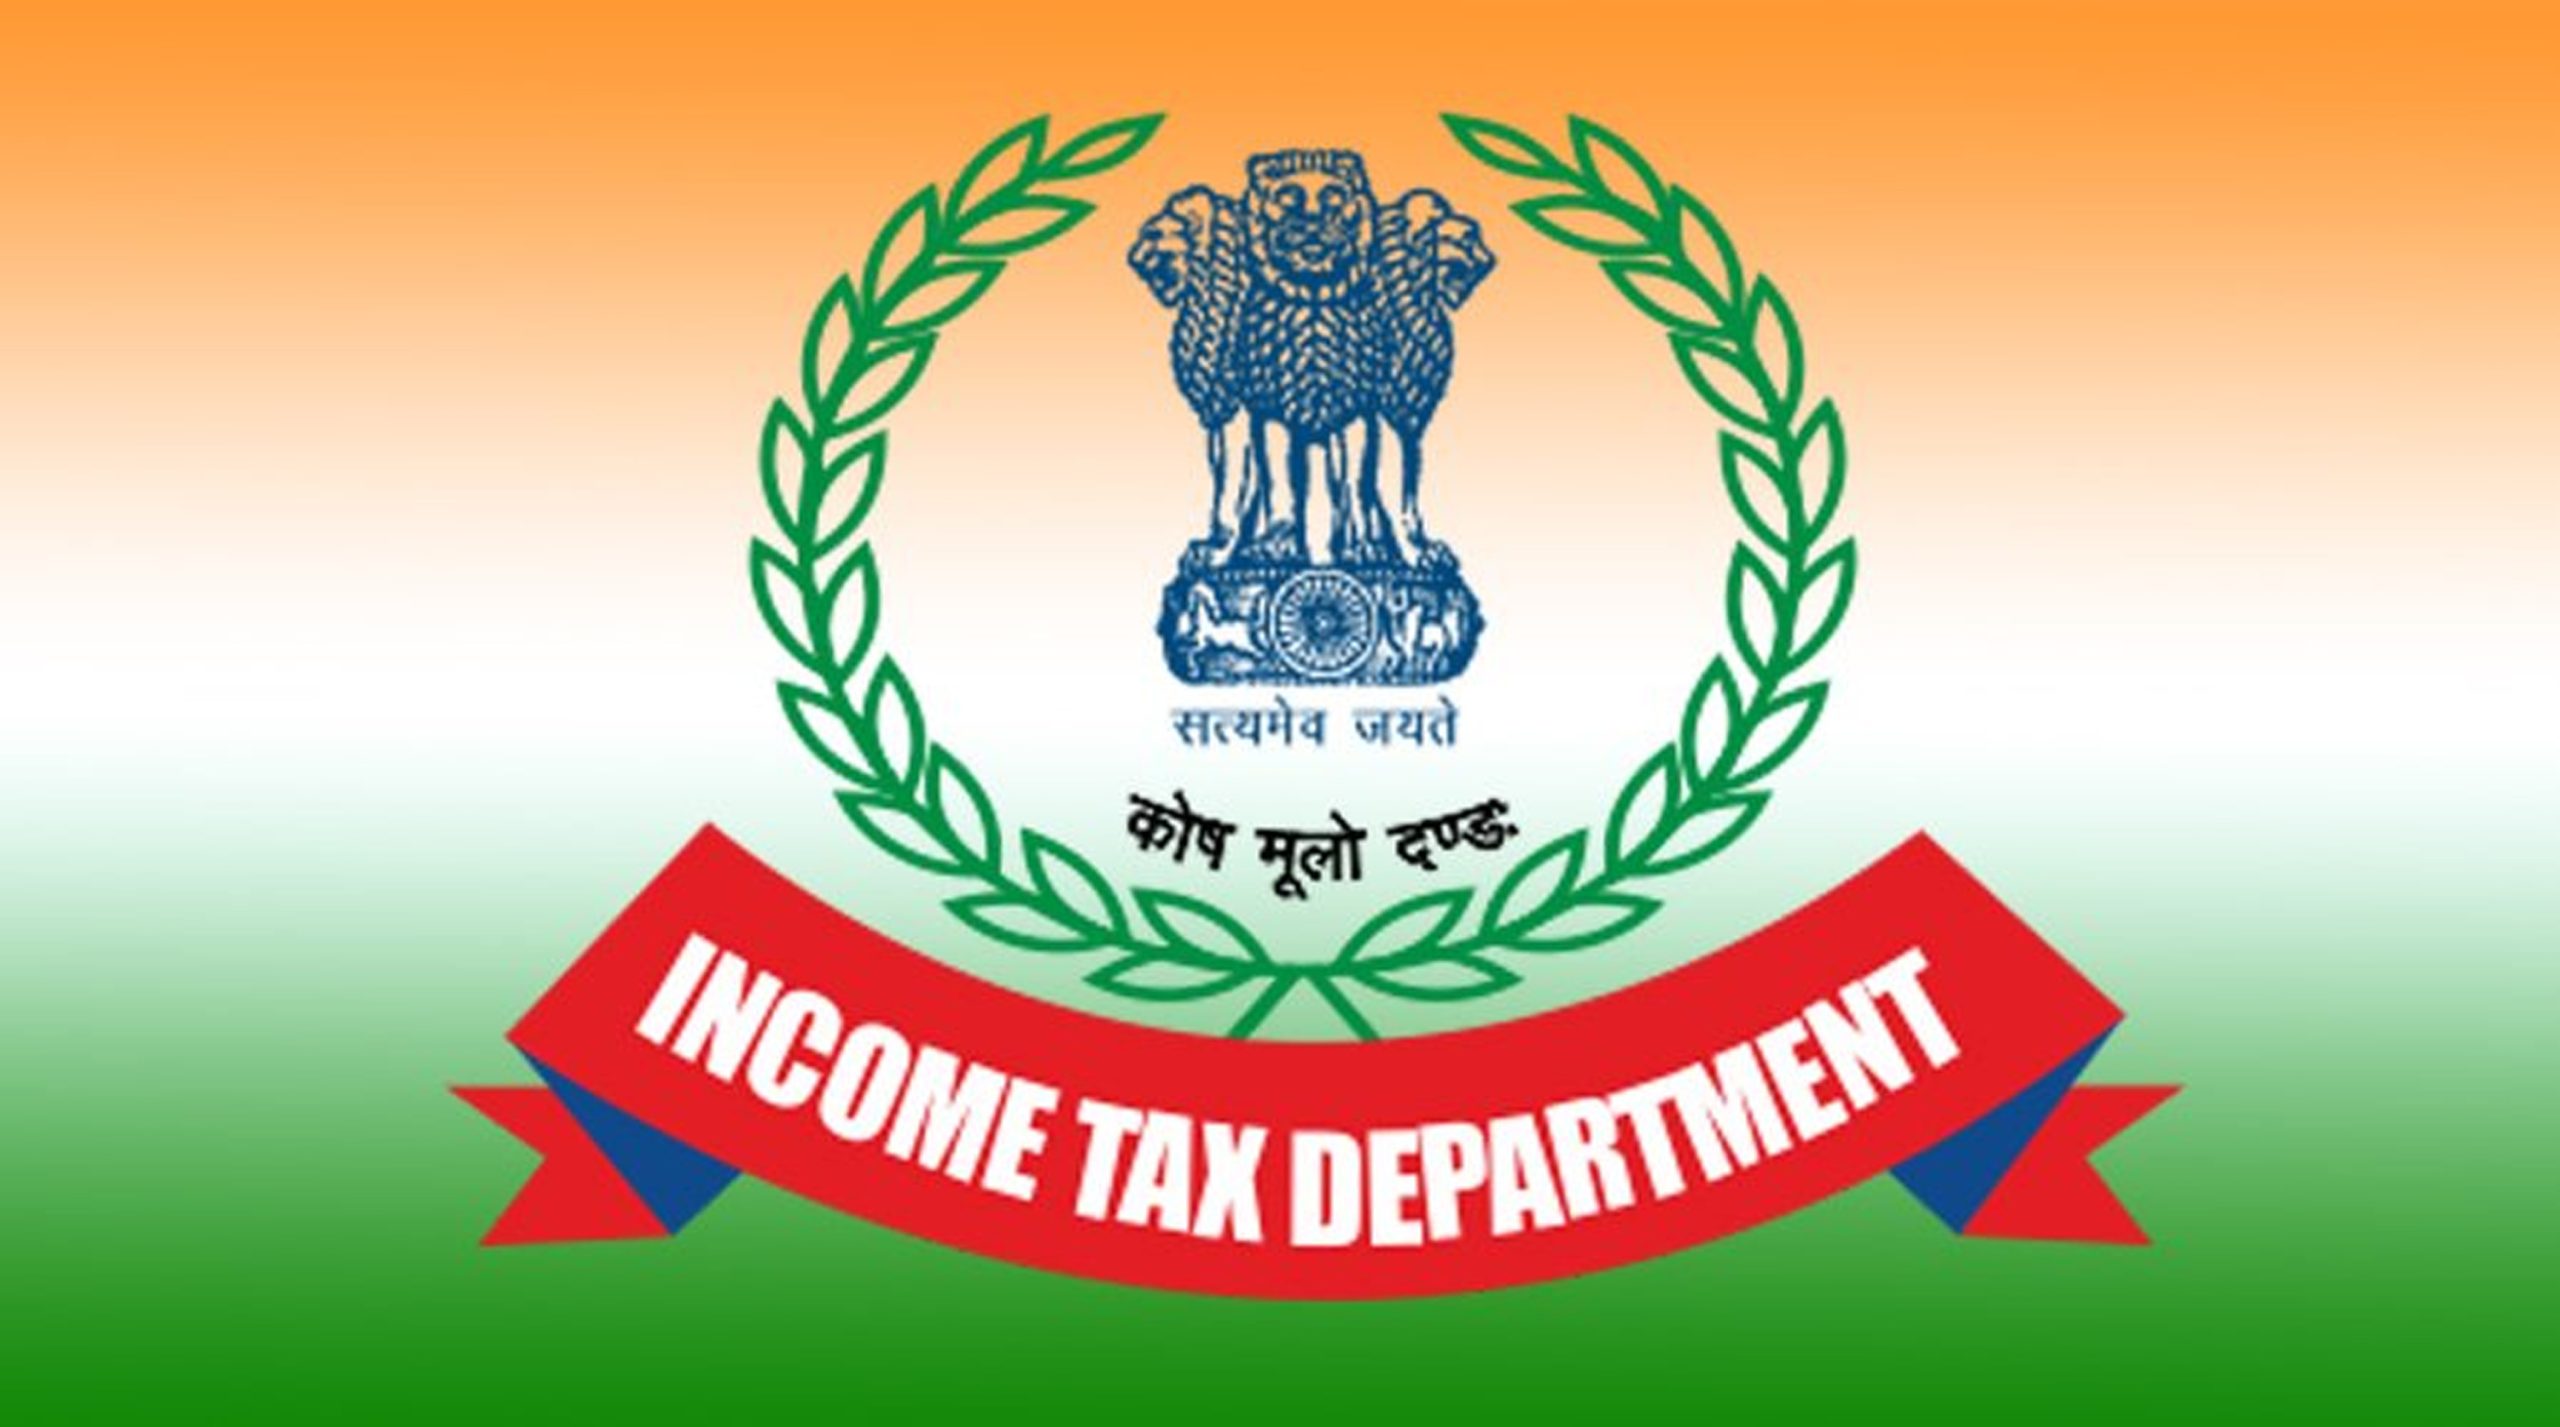 Contact Income Tax Return Office